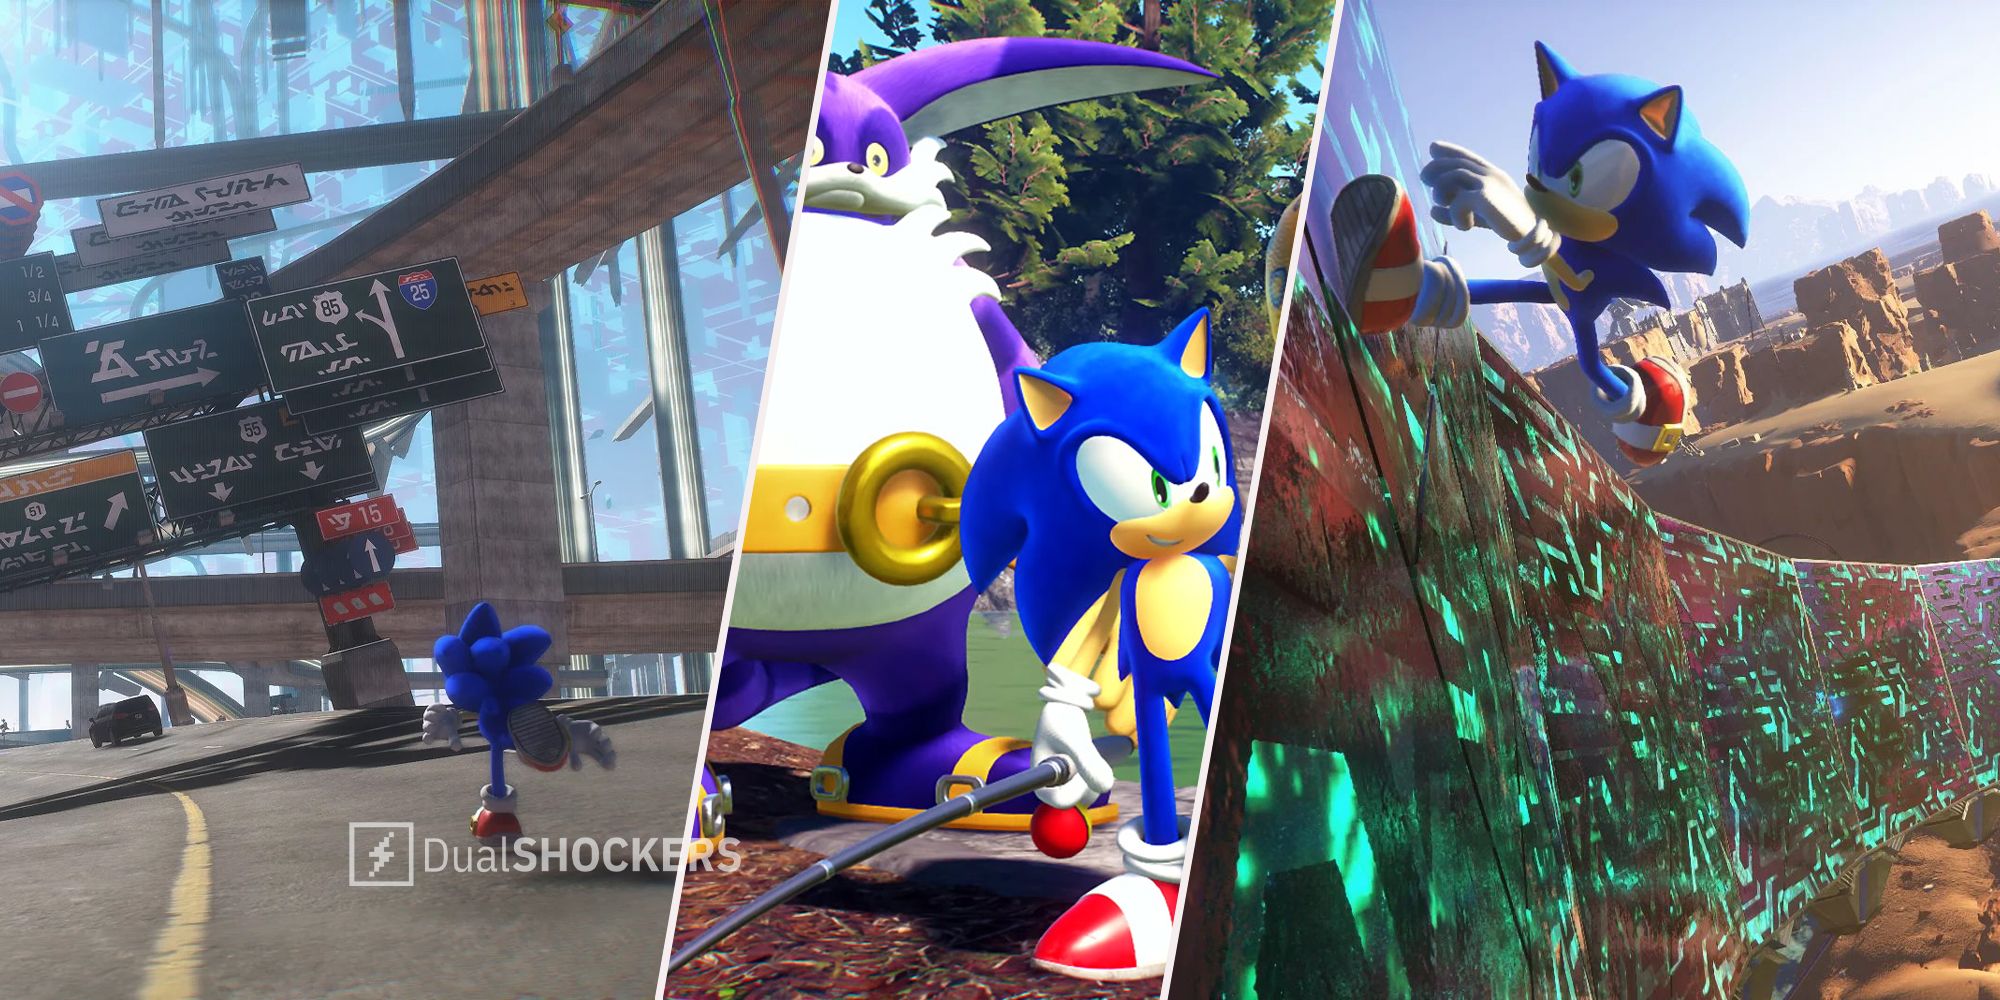 Sonic Frontiers Reveals Free DLC Road Map For 2023 - New Story, Playable  Characters & More